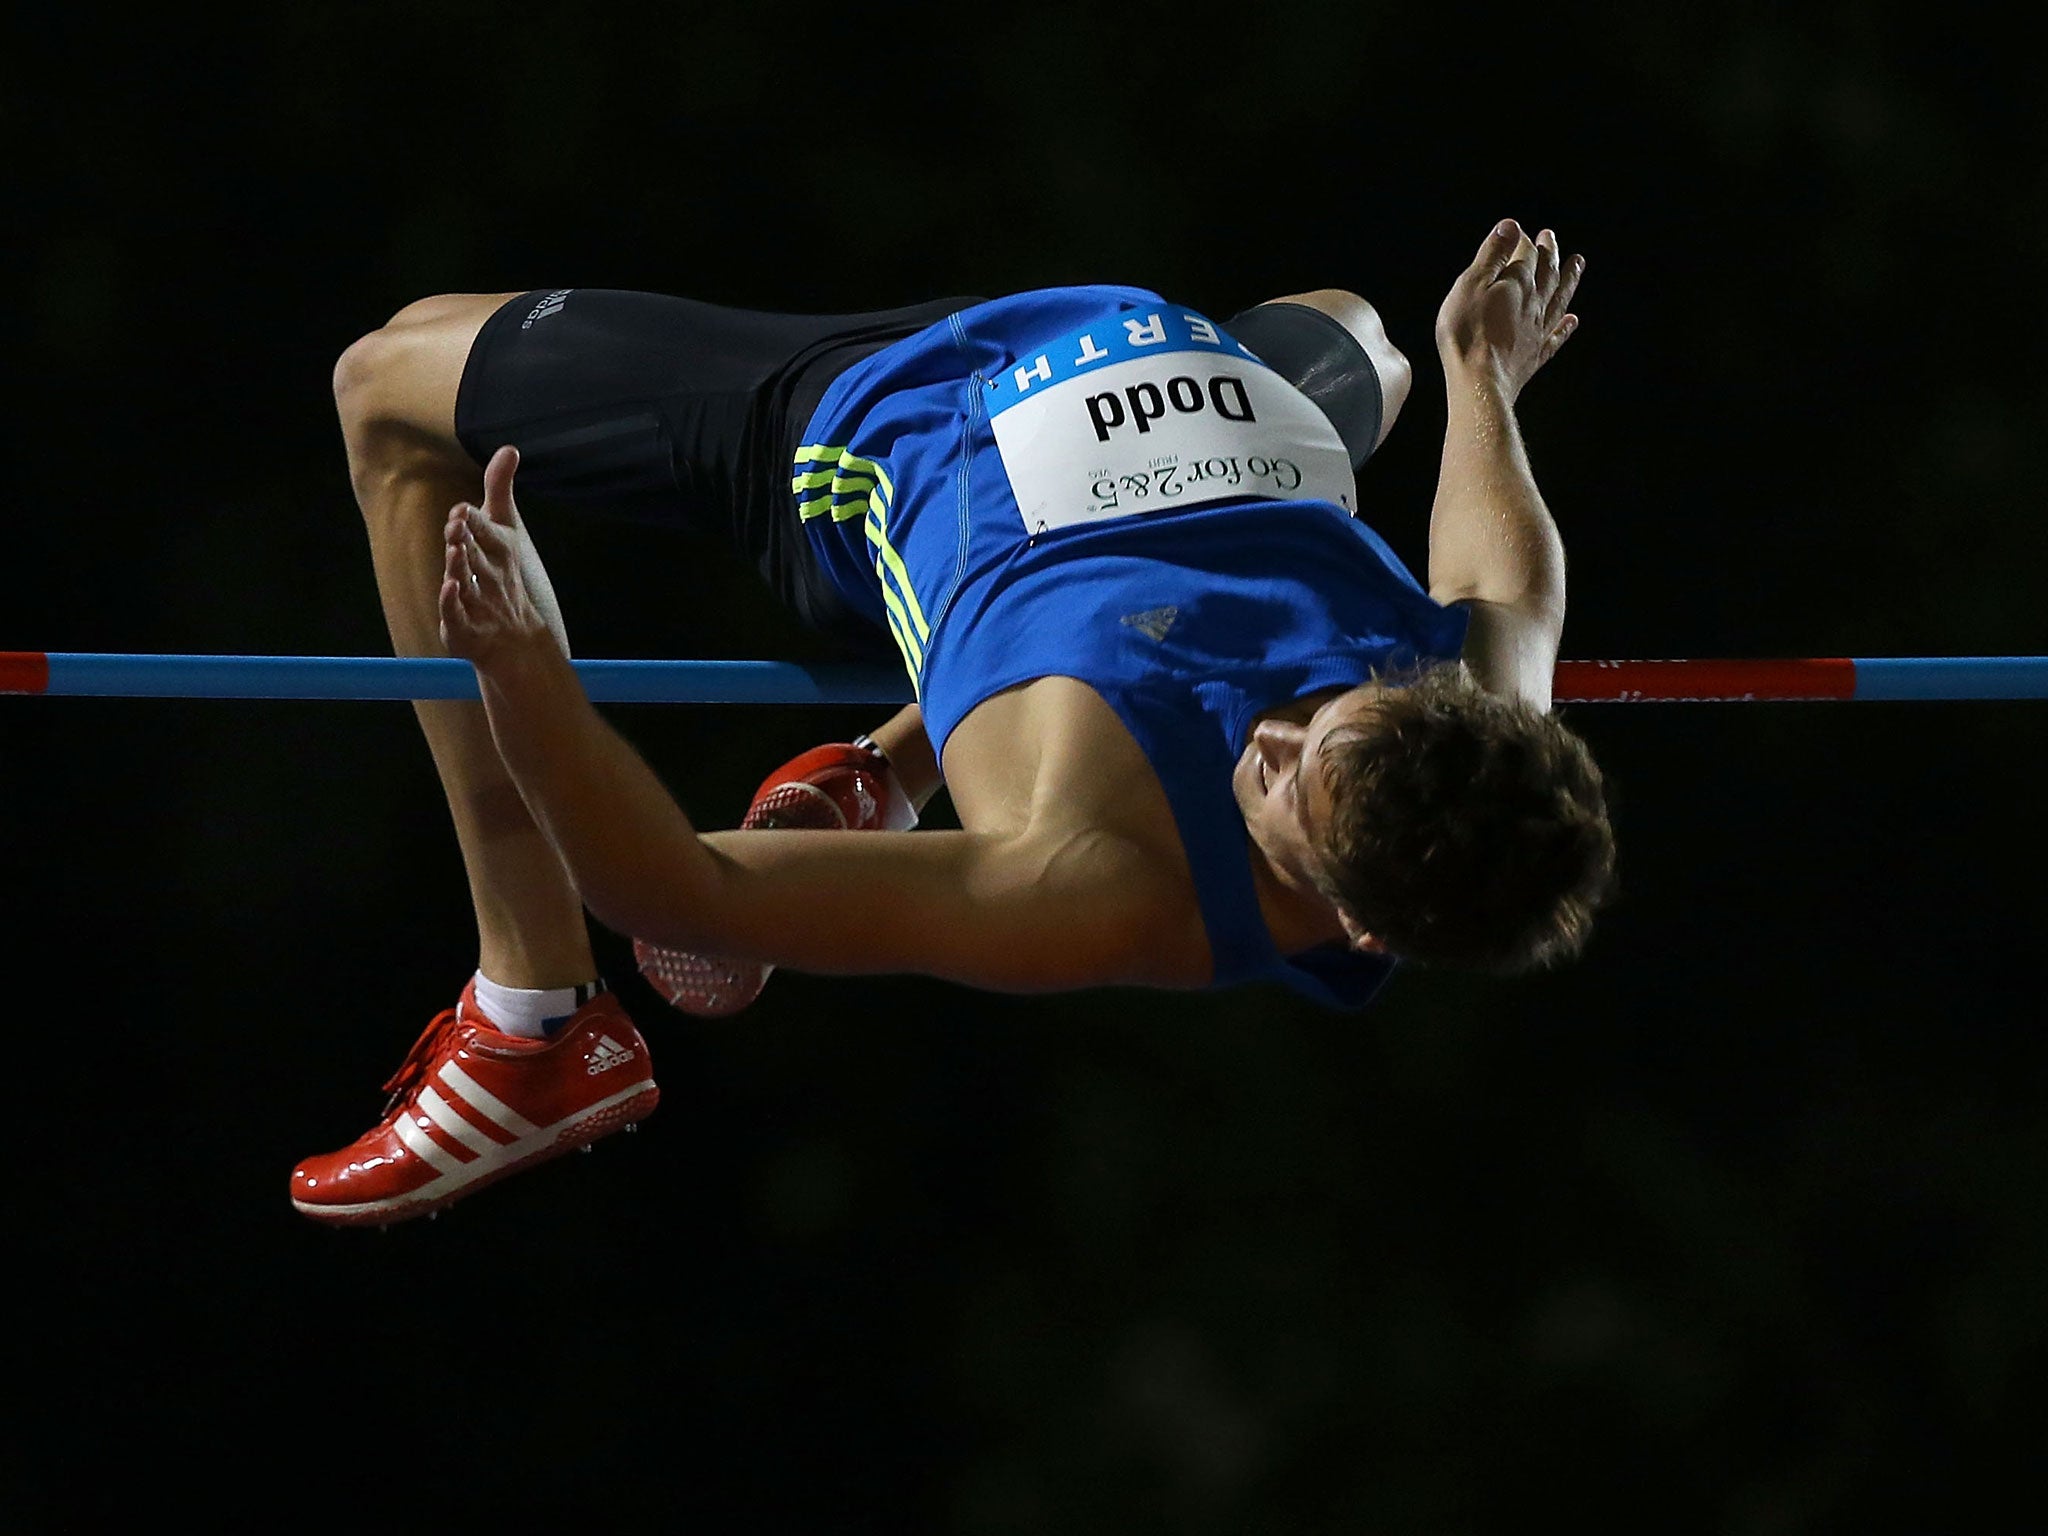 Chris Dodd is ranked as the fourth-best male high jumper in Australia and was training for the Olympics